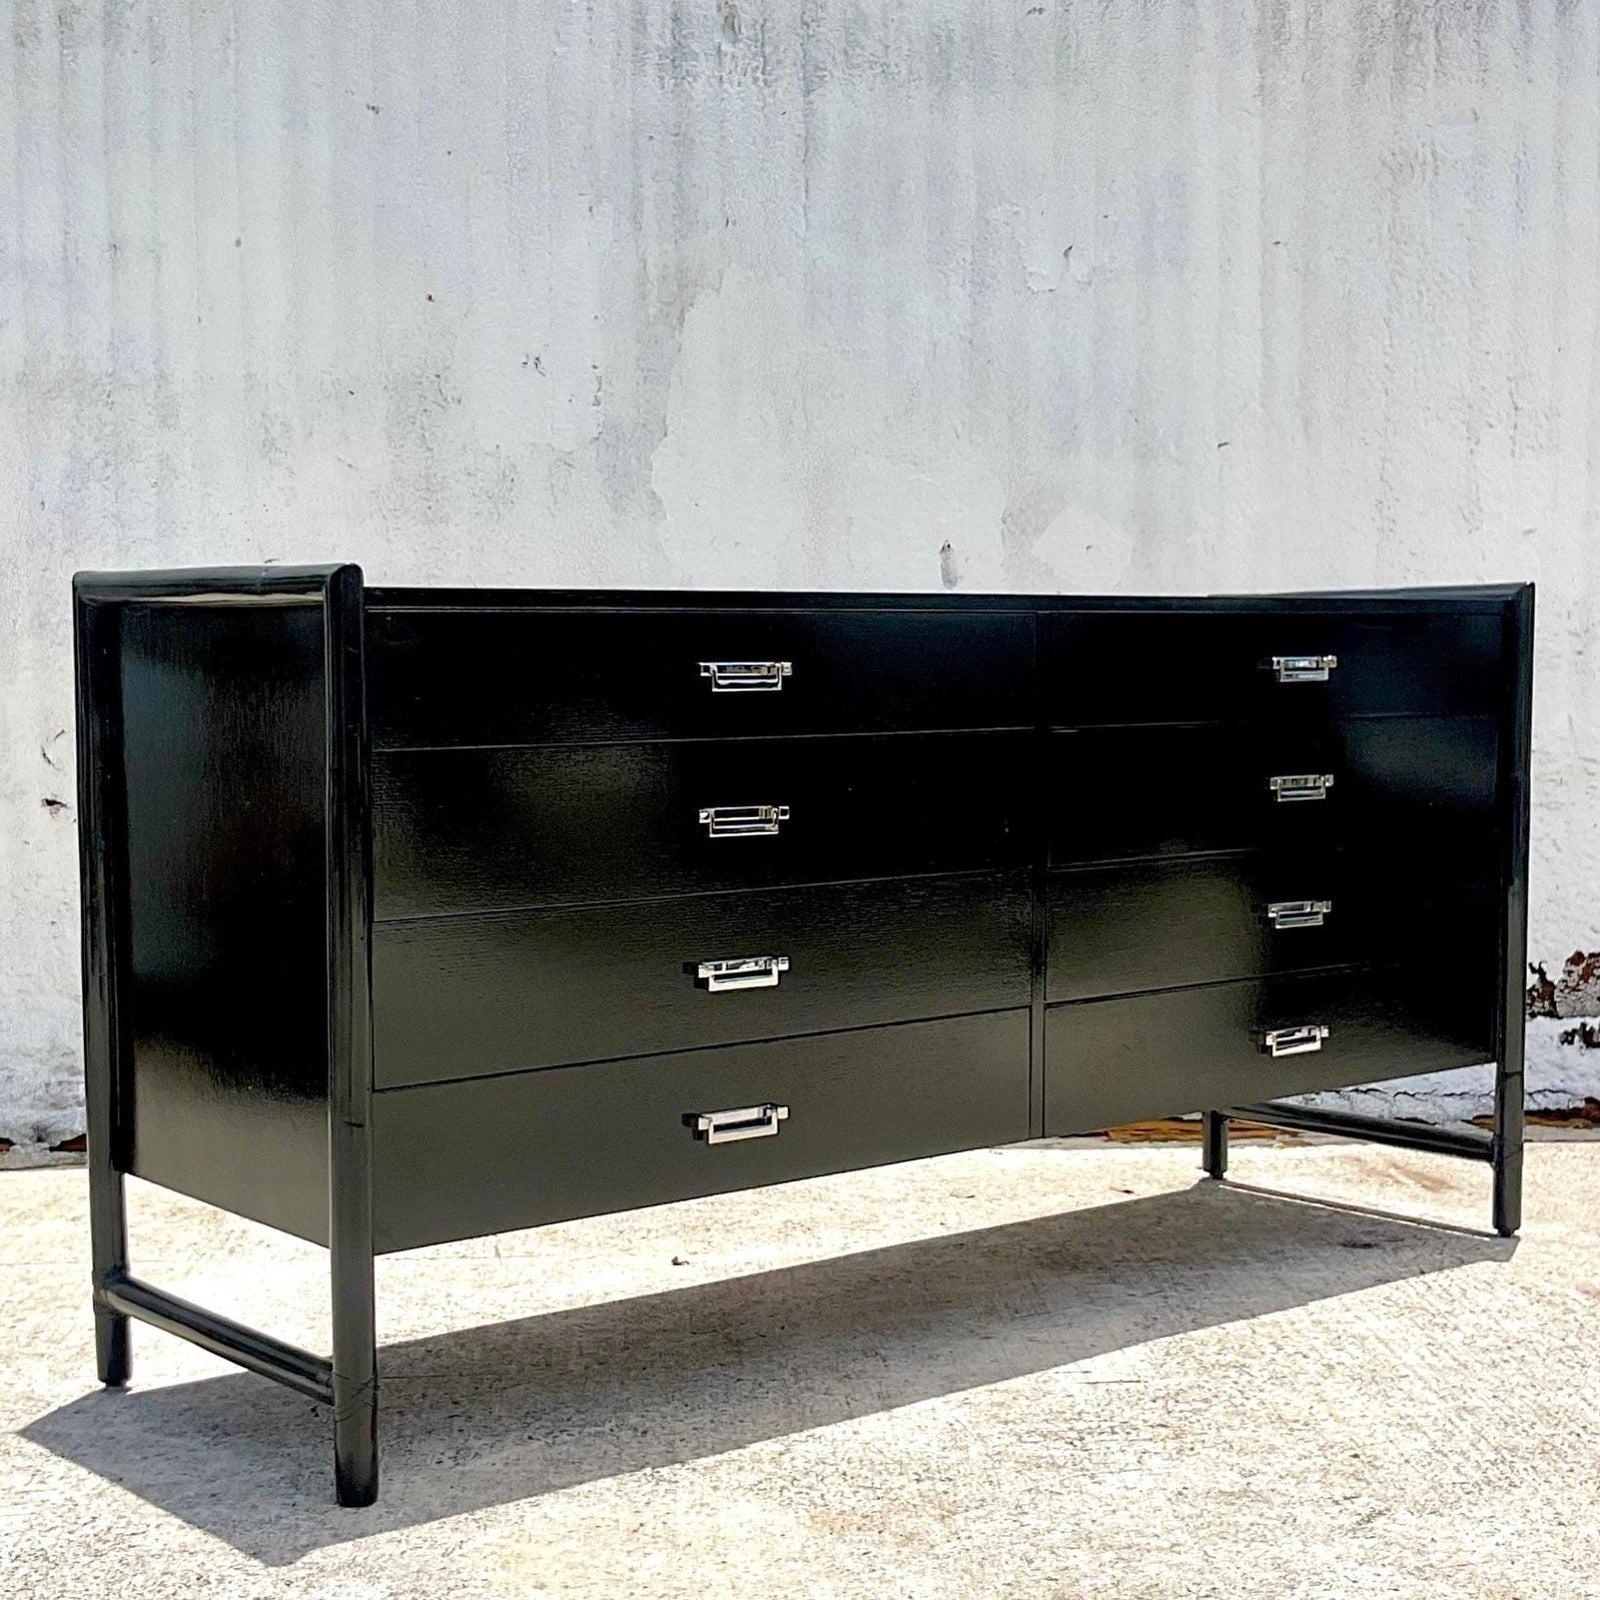 A stunning vintage Coastal dresser. Made by the iconic McGuire group. A beautiful black lacquered oak cabinet with rattan trim. Chrome plated handles. Matching nightstands also available. Acquired from a Palm Beach estate.